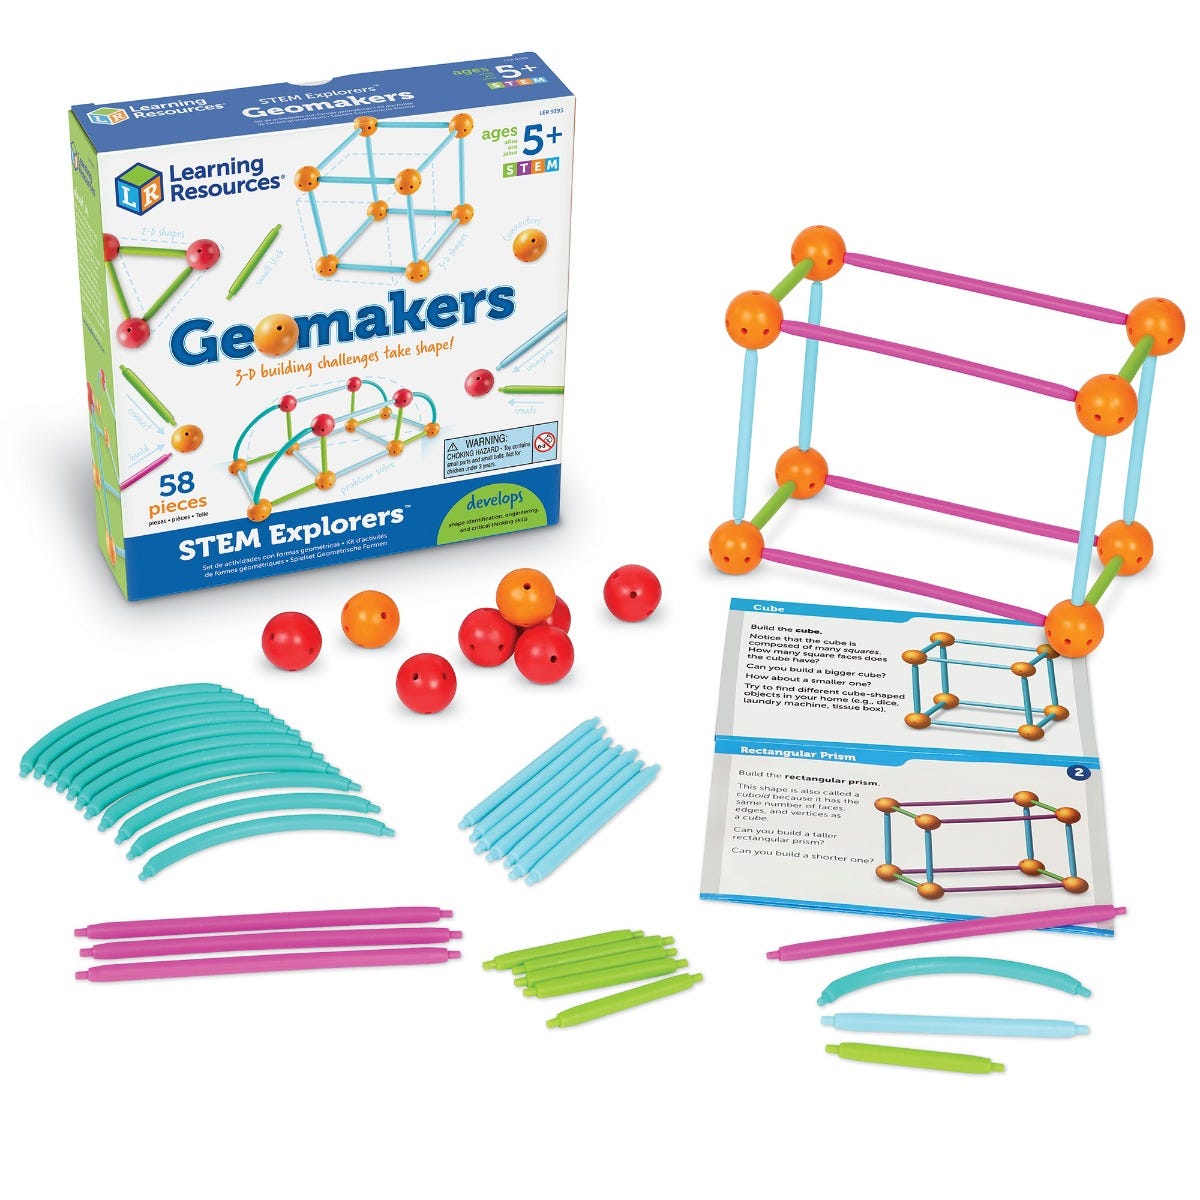 STEM Explorers Geomakers, The STEM Explorers Geomakers help children develop their understanding of 2D and 3D shapes and geometry through fun, hands-on building activities and challenges. The STEM Explorers Geomakers set comes with an activity guide and includes 10 engaging tasks designed to develop problem solving and critical thinking skills vital in early STEM. Children can also use their natural curiosity and imagination to experiment and build their own special constructions! Activate a child's natural